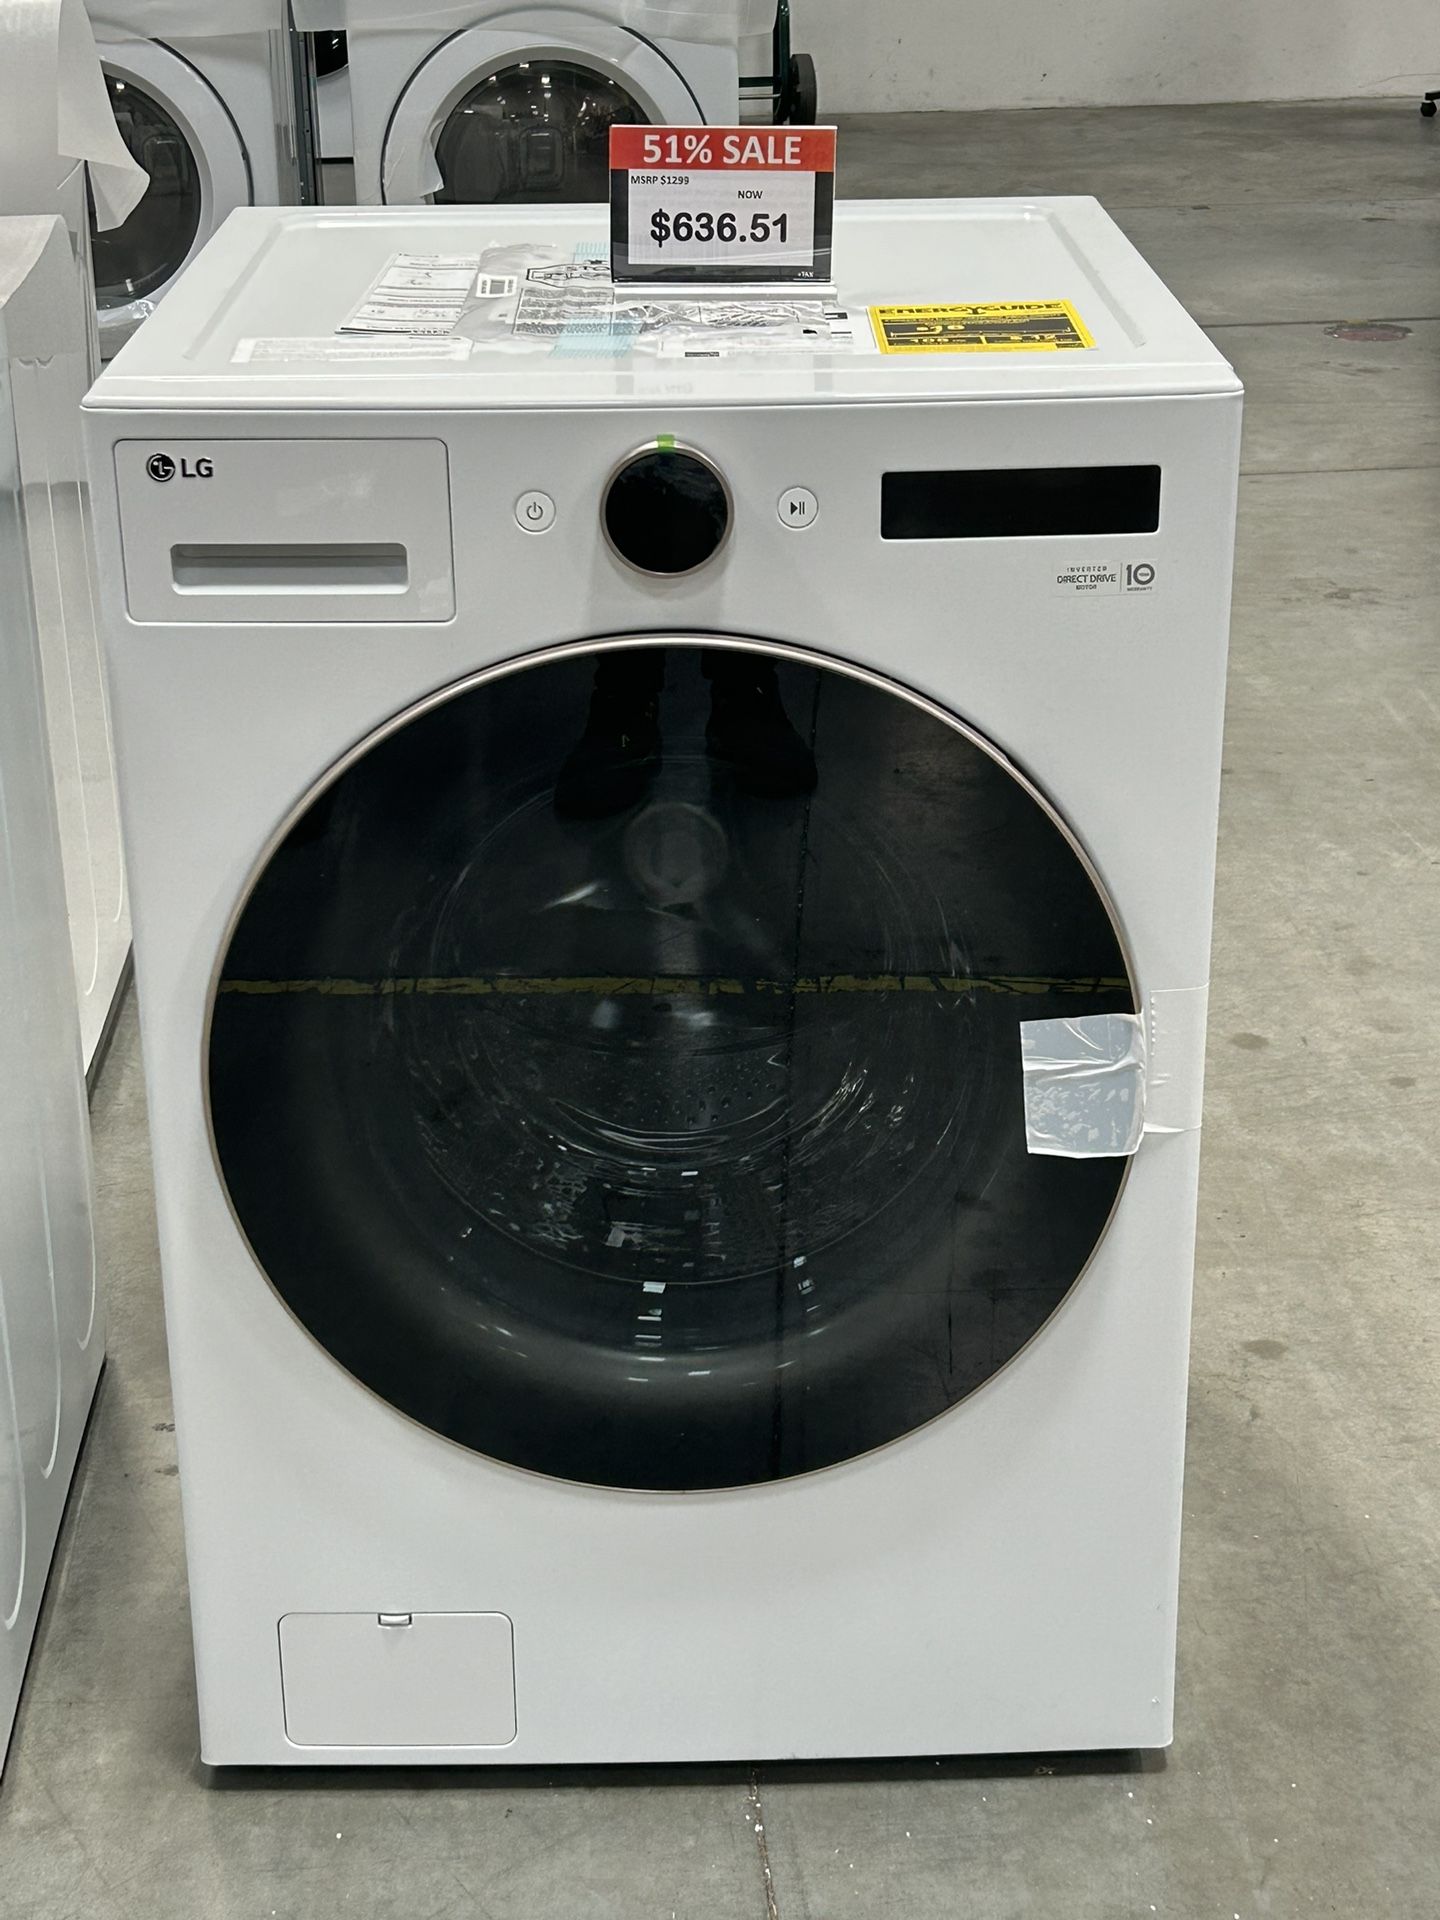 [LG]5.0 cu. ft. Mega Capacity Smart Front Load Energy Star Washer With Turbowash 360 Degrees And AI DD Built-in Intelligence 